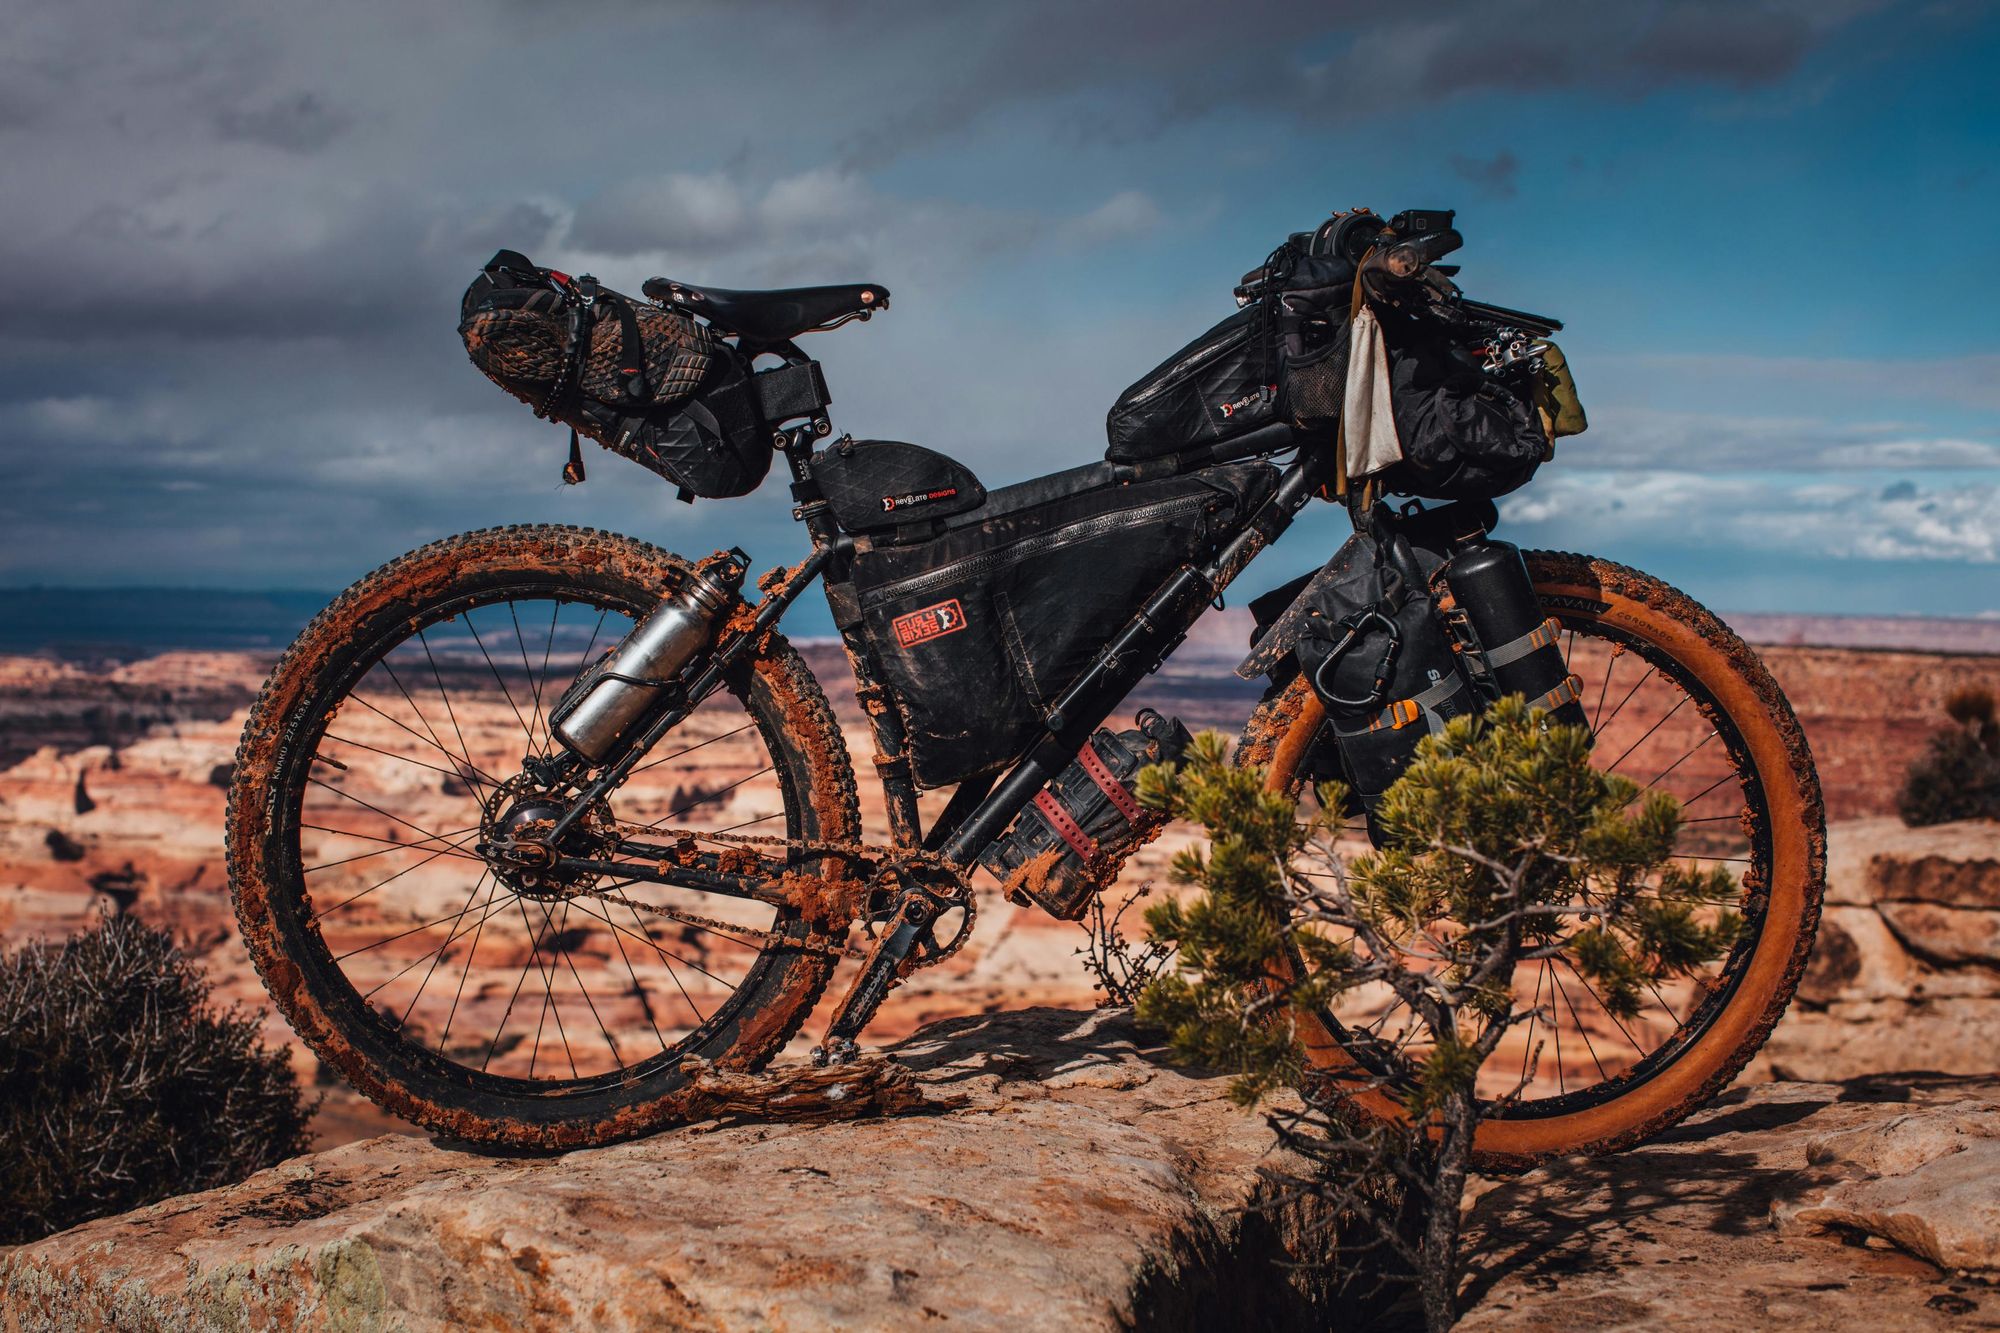  A fully-loaded bikepacking rig, complete with bags on the saddle, frame, tubes, forks and handelbars. Photo: Patrick Hendry (via Unsplash)